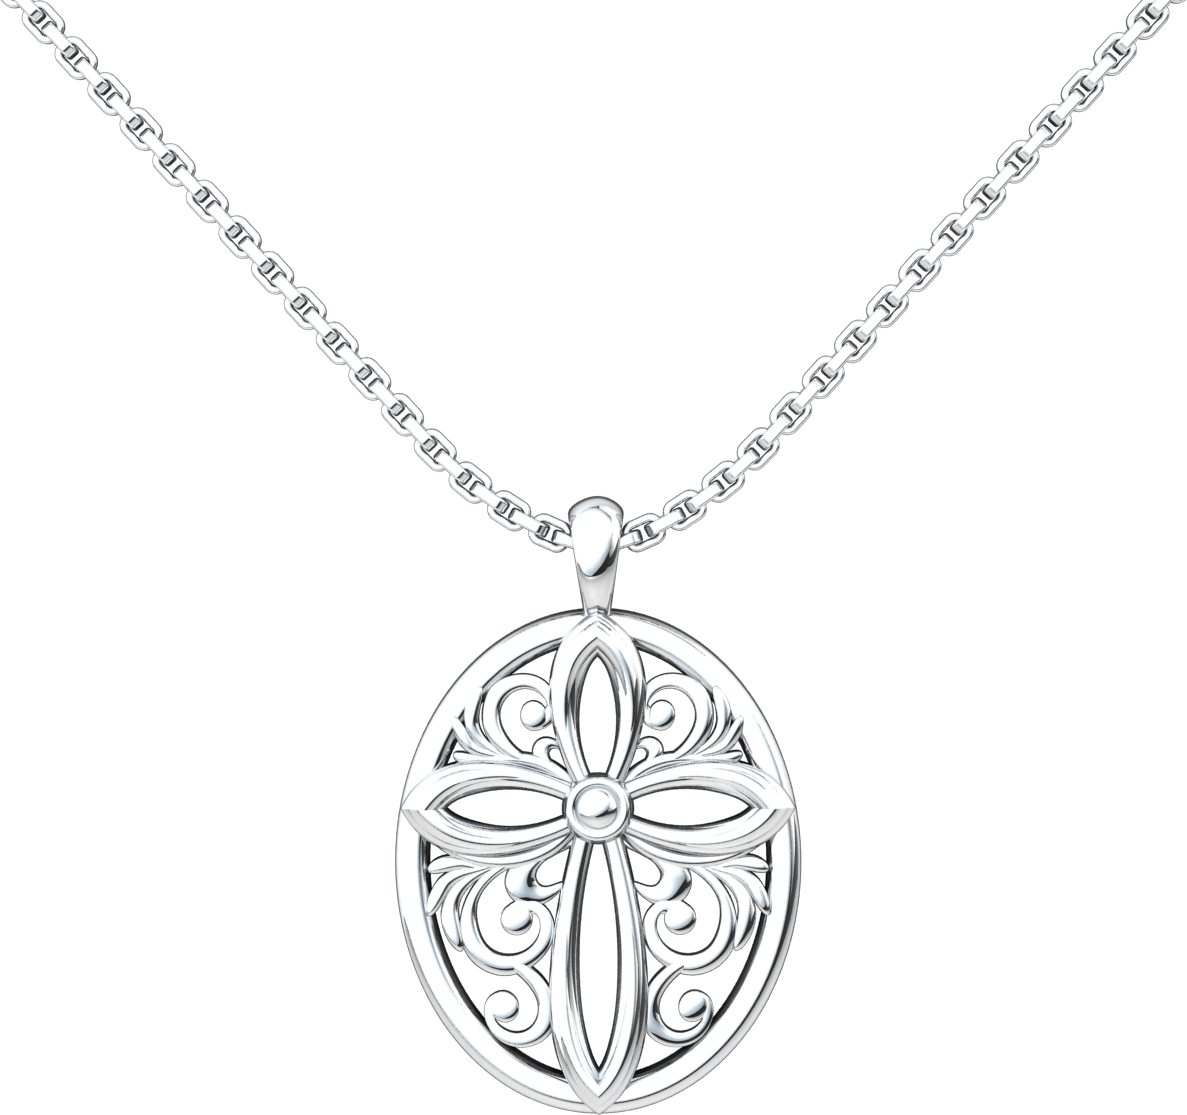 Encircled Cross Sterling Silver Necklace with 18 inch chain